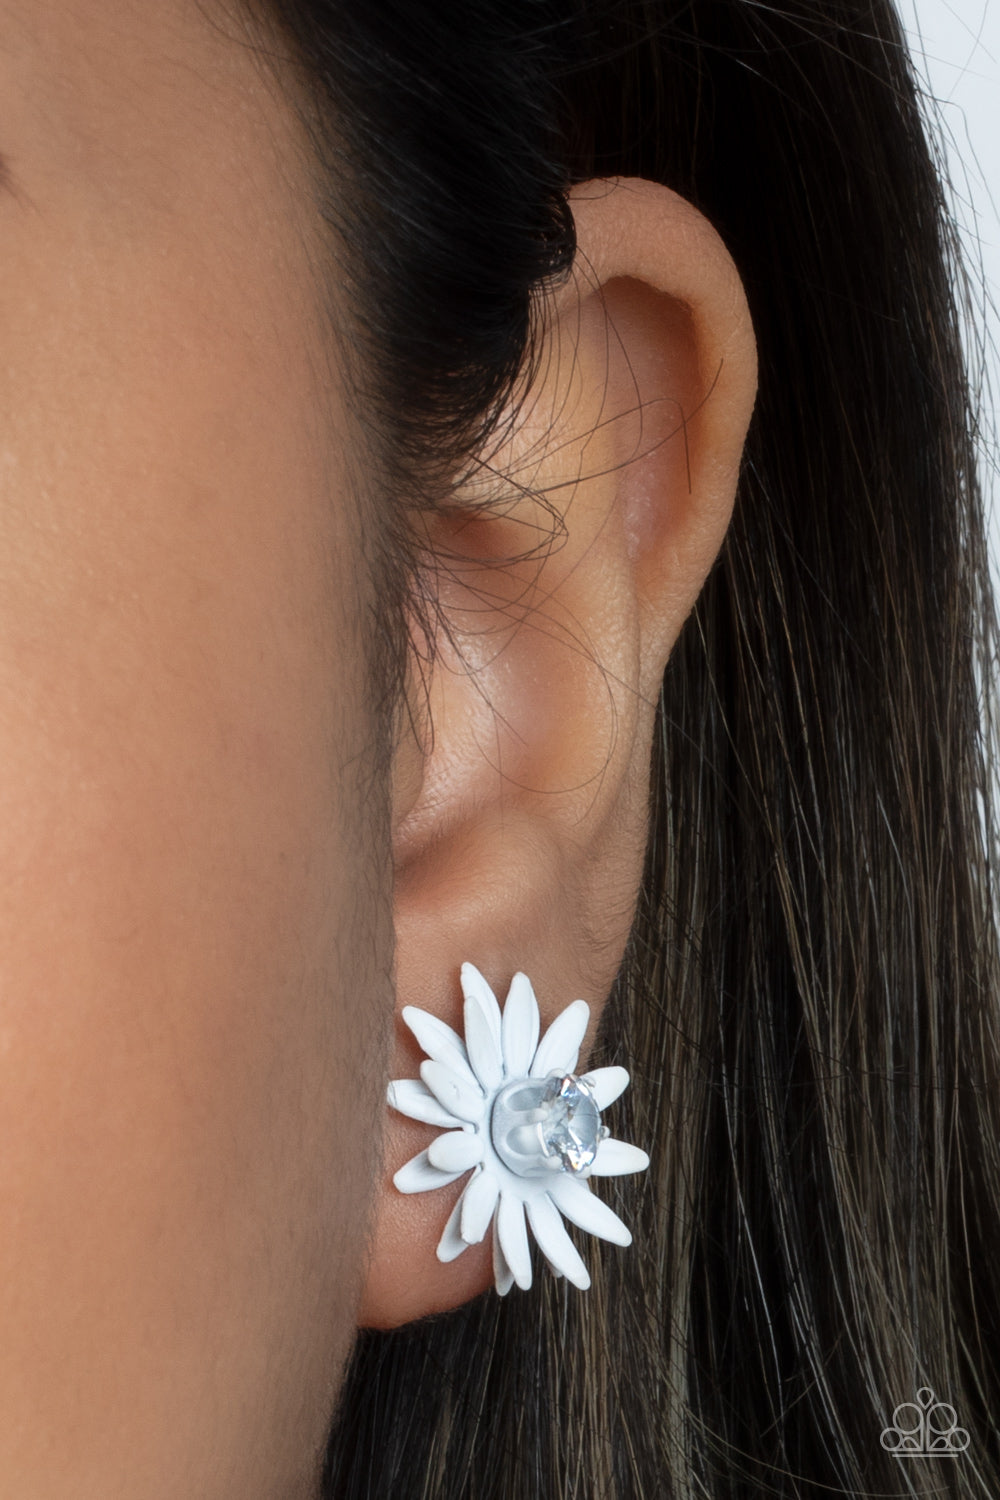 Sunshiny DAIS-y - White Post Earring - Paparazzi Accessories  Layers of white petals fan out from an oversized white rhinestone fitting, blooming into a sparkly floral centerpiece. Earring attaches to a standard post fitting.  All Paparazzi Accessories are lead free and nickel free!  Sold as one pair of post earrings.